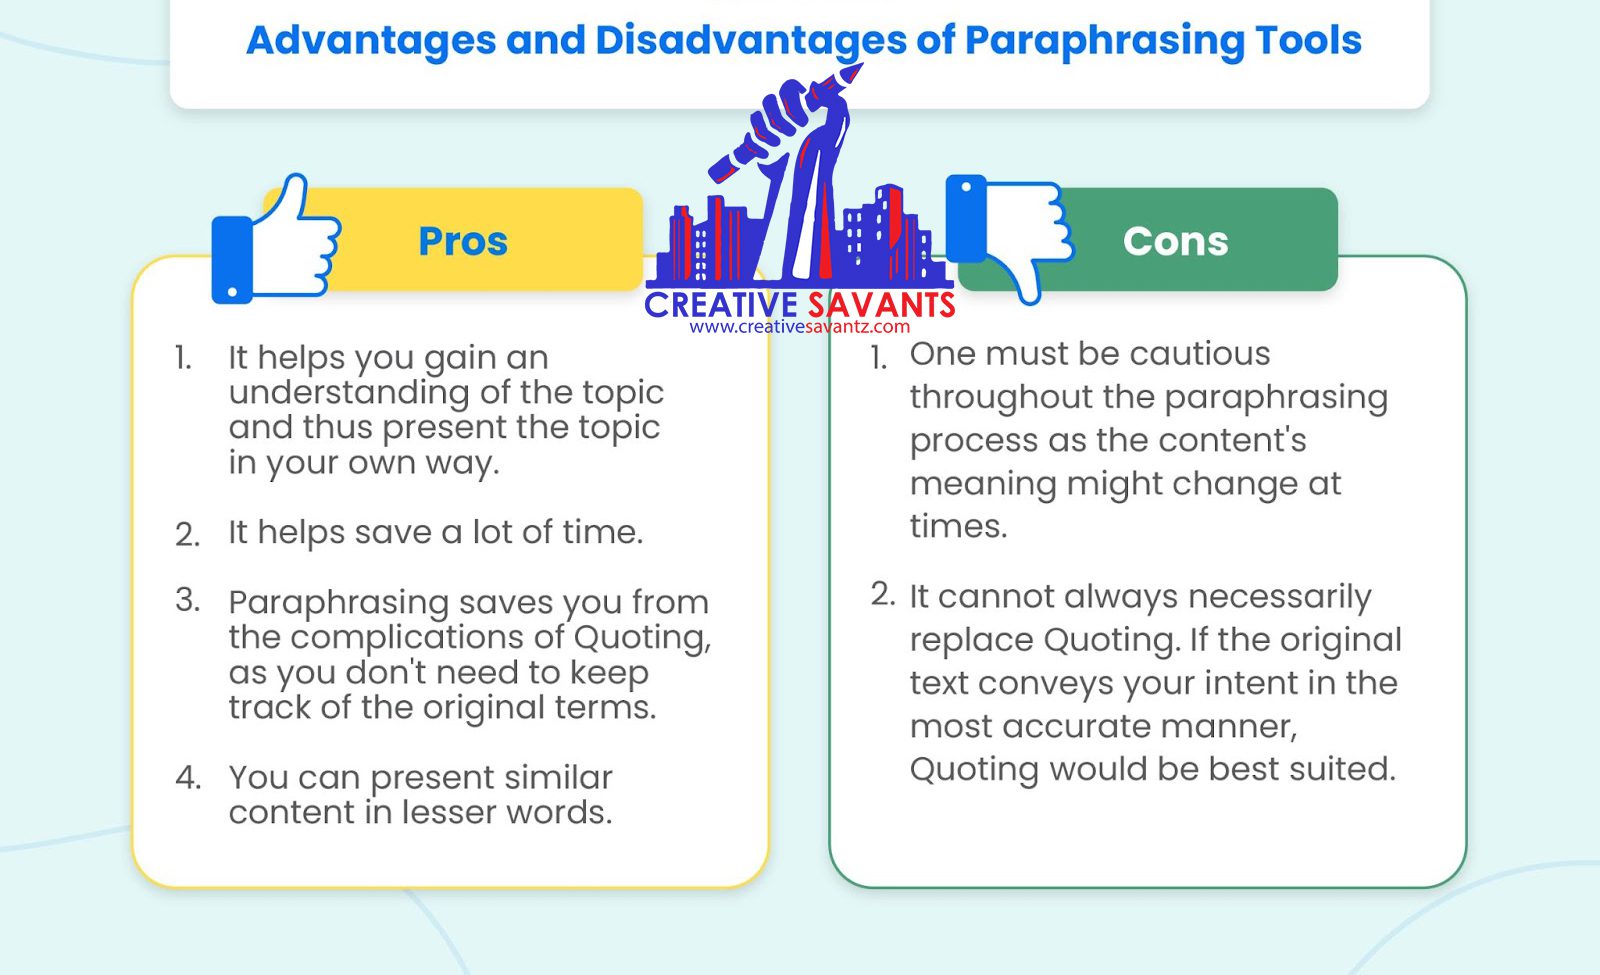 PROS and CONS of paraphrasing tools